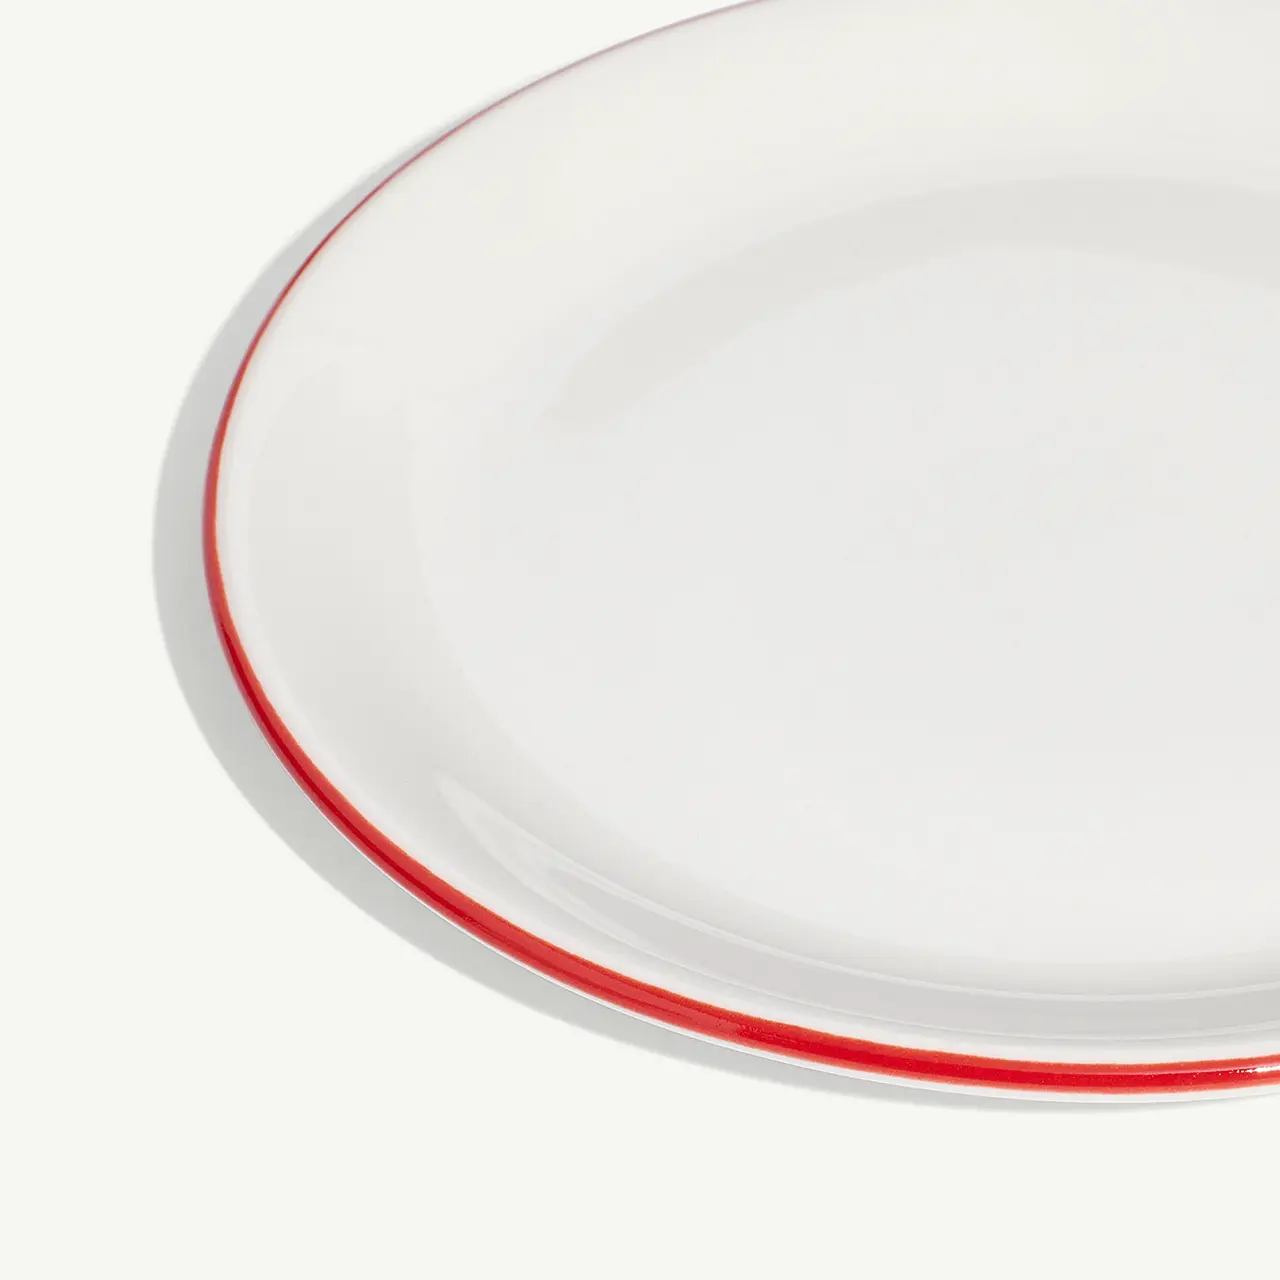 A close-up of a white circular plate with a thin red border against a light background.